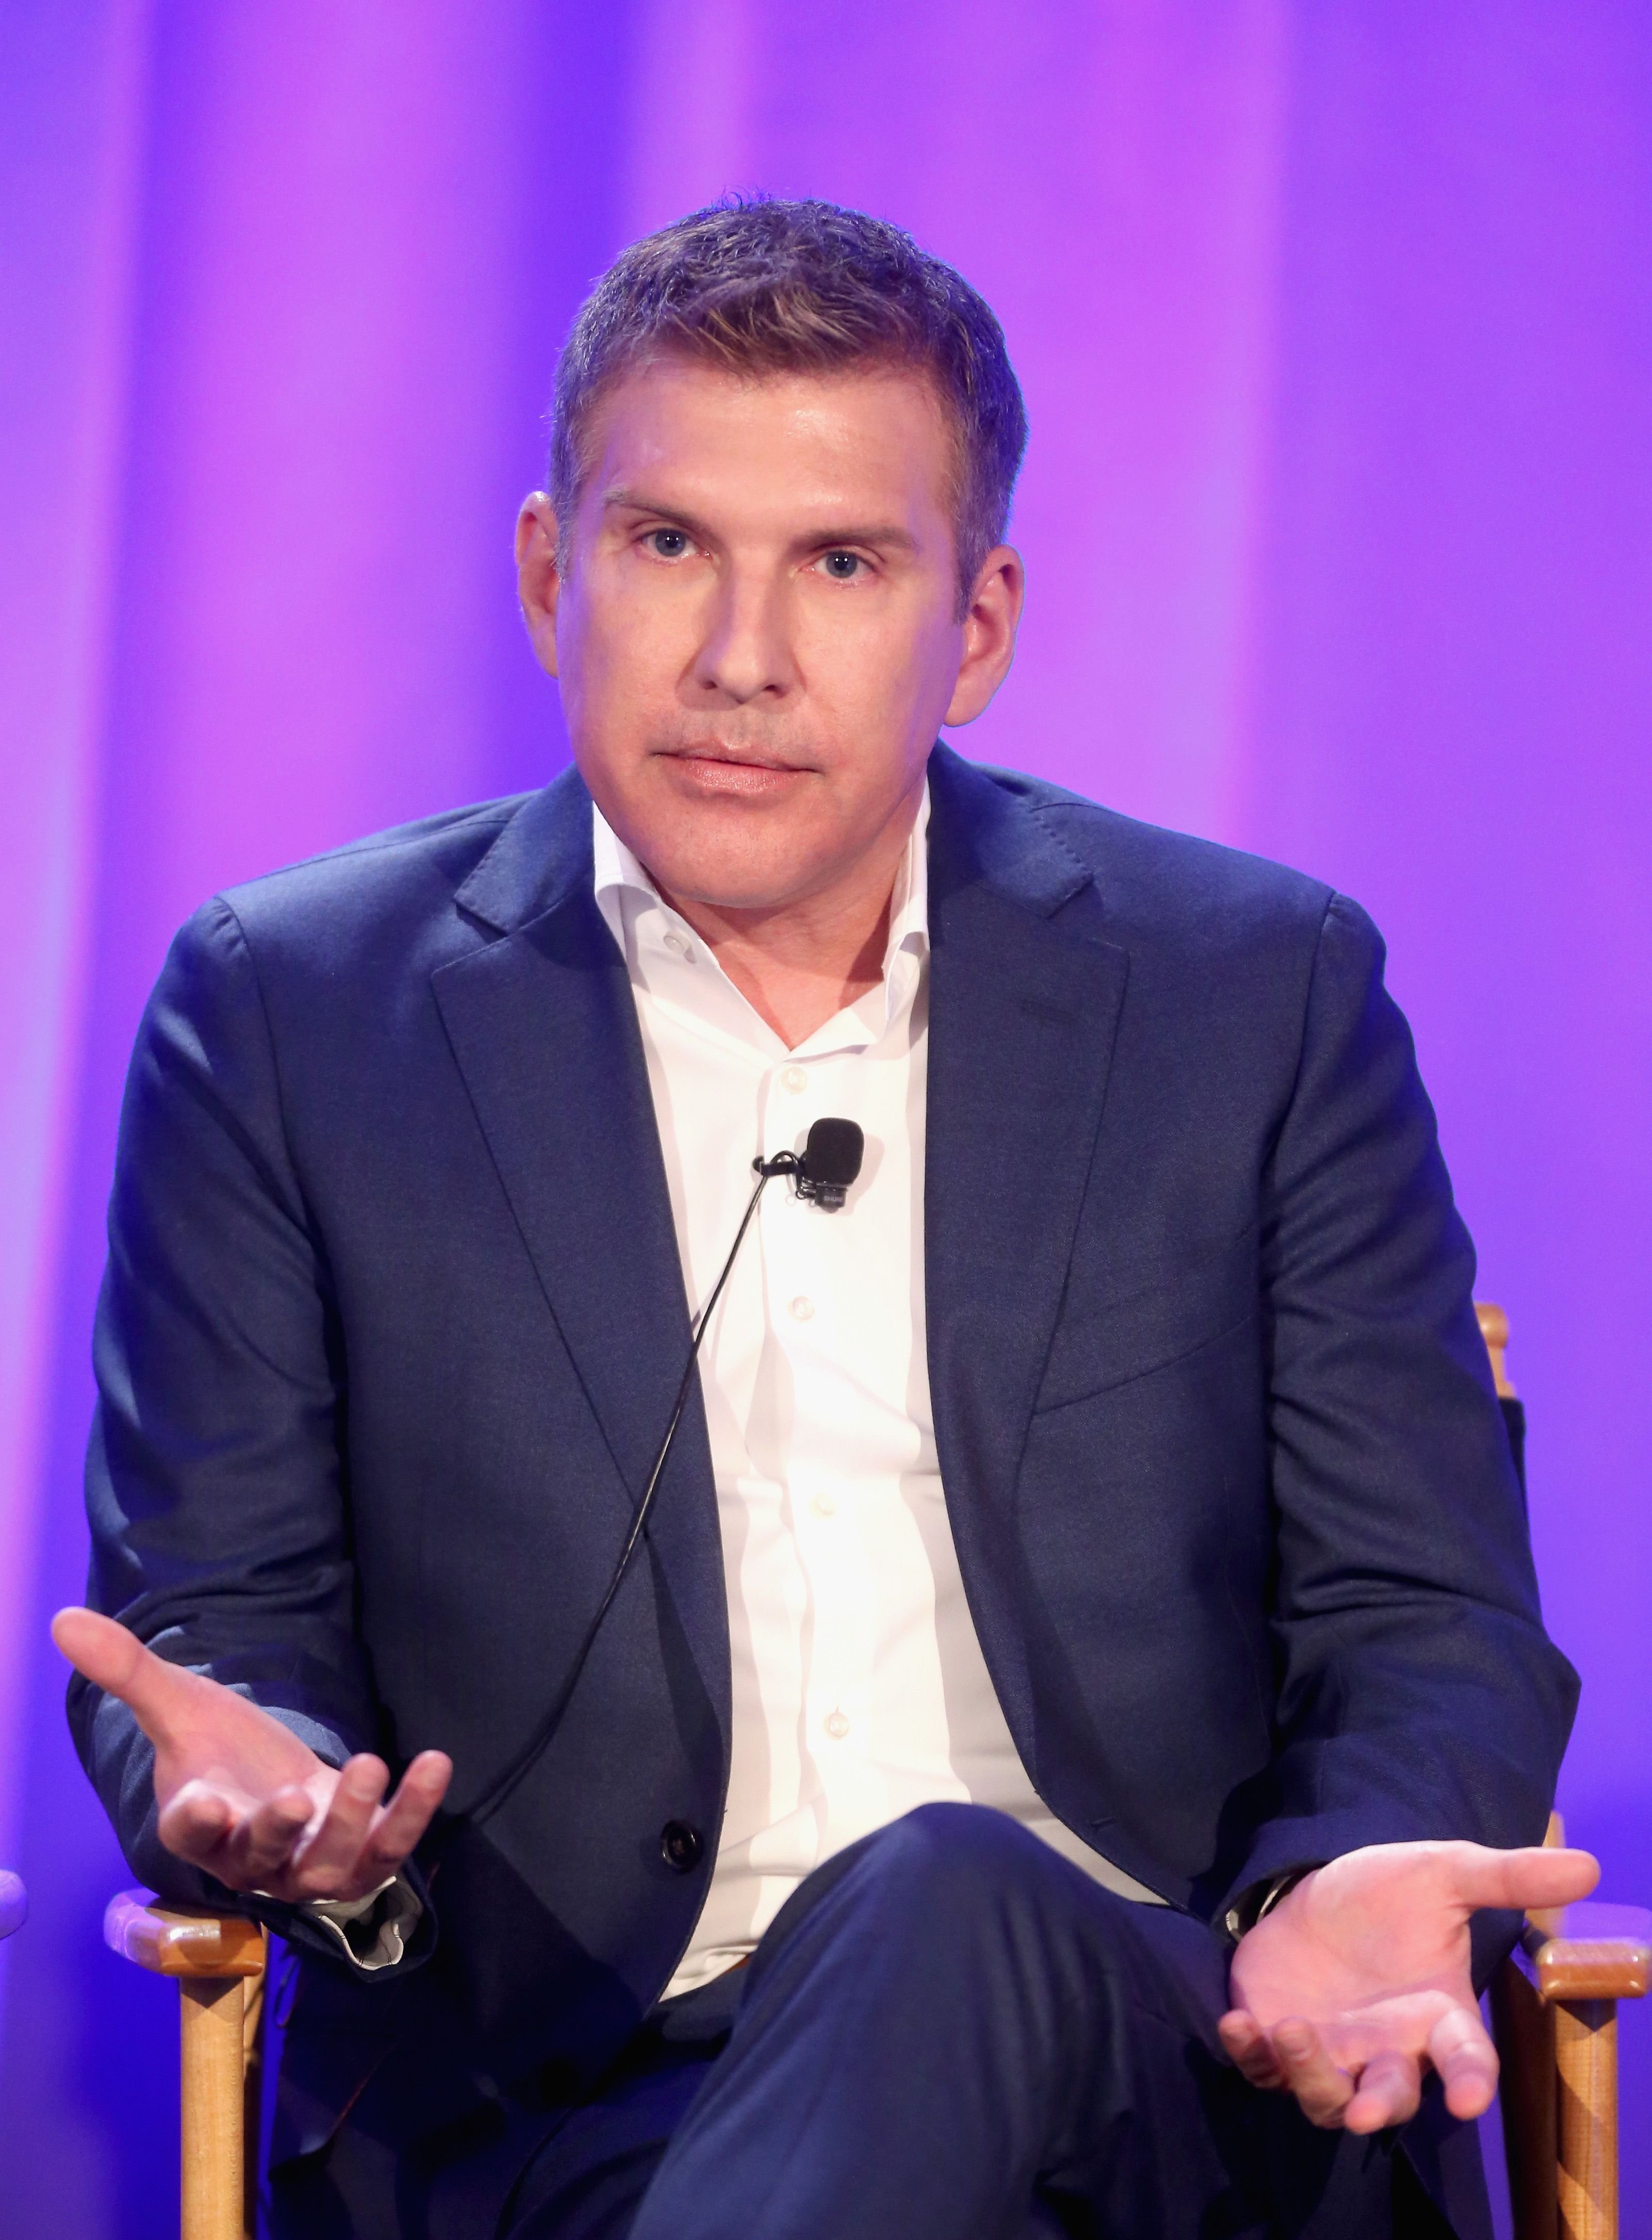 Todd Chrisley during the "Chrisley knows best" panel at the 2016 NBCUniversal Summer Press Day at the Four Seasons Hotel Westlake Village on April 1, 2016 in Westlake Village, California.  |  Source: Getty Images